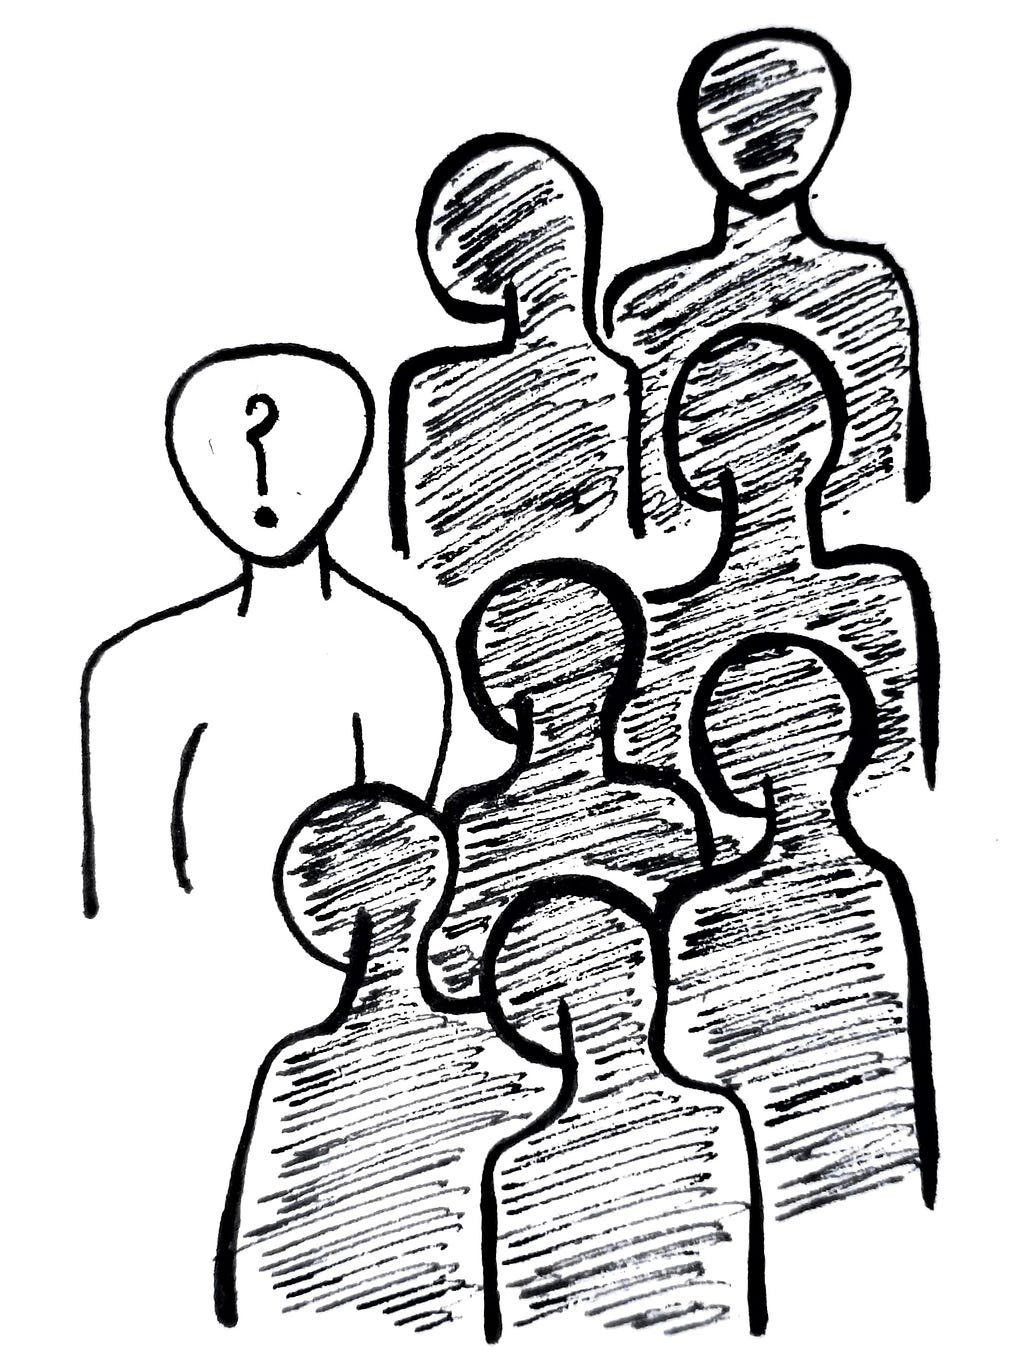 On the left, there is a figure with a question mark on its face, while on the right, there are seven shadows giving the impression that they are all watching the figure on the left.